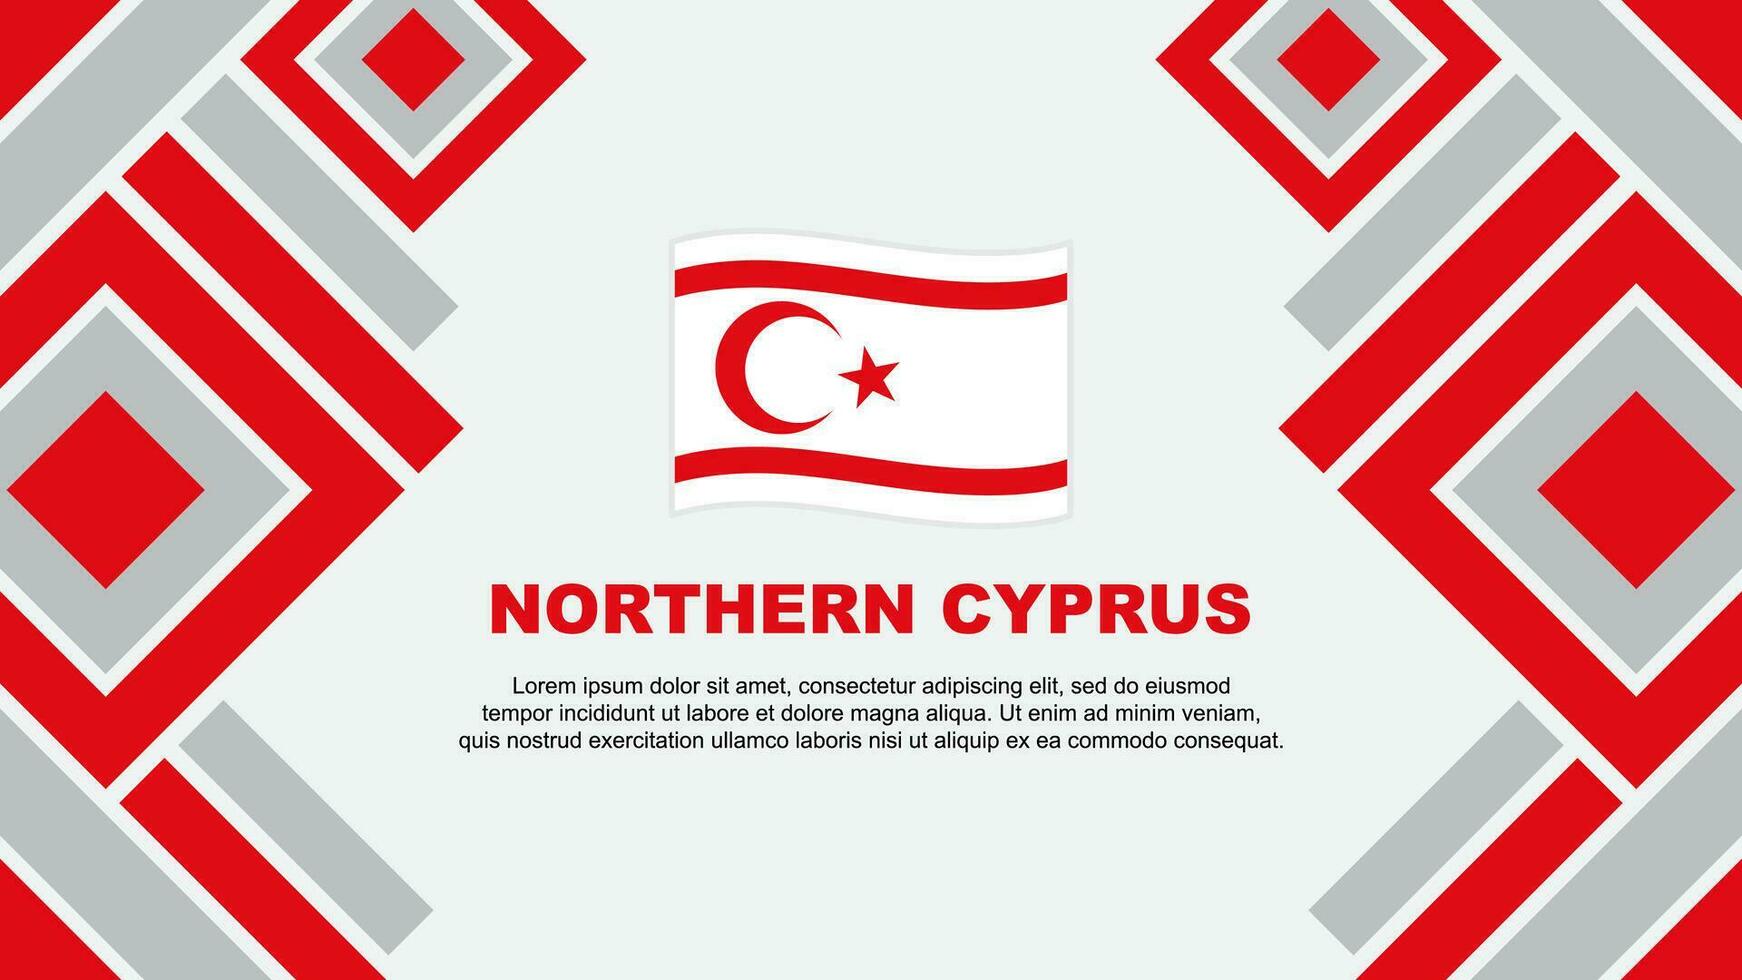 Northern Cyprus Flag Abstract Background Design Template. Northern Cyprus Independence Day Banner Wallpaper Vector Illustration. Northern Cyprus